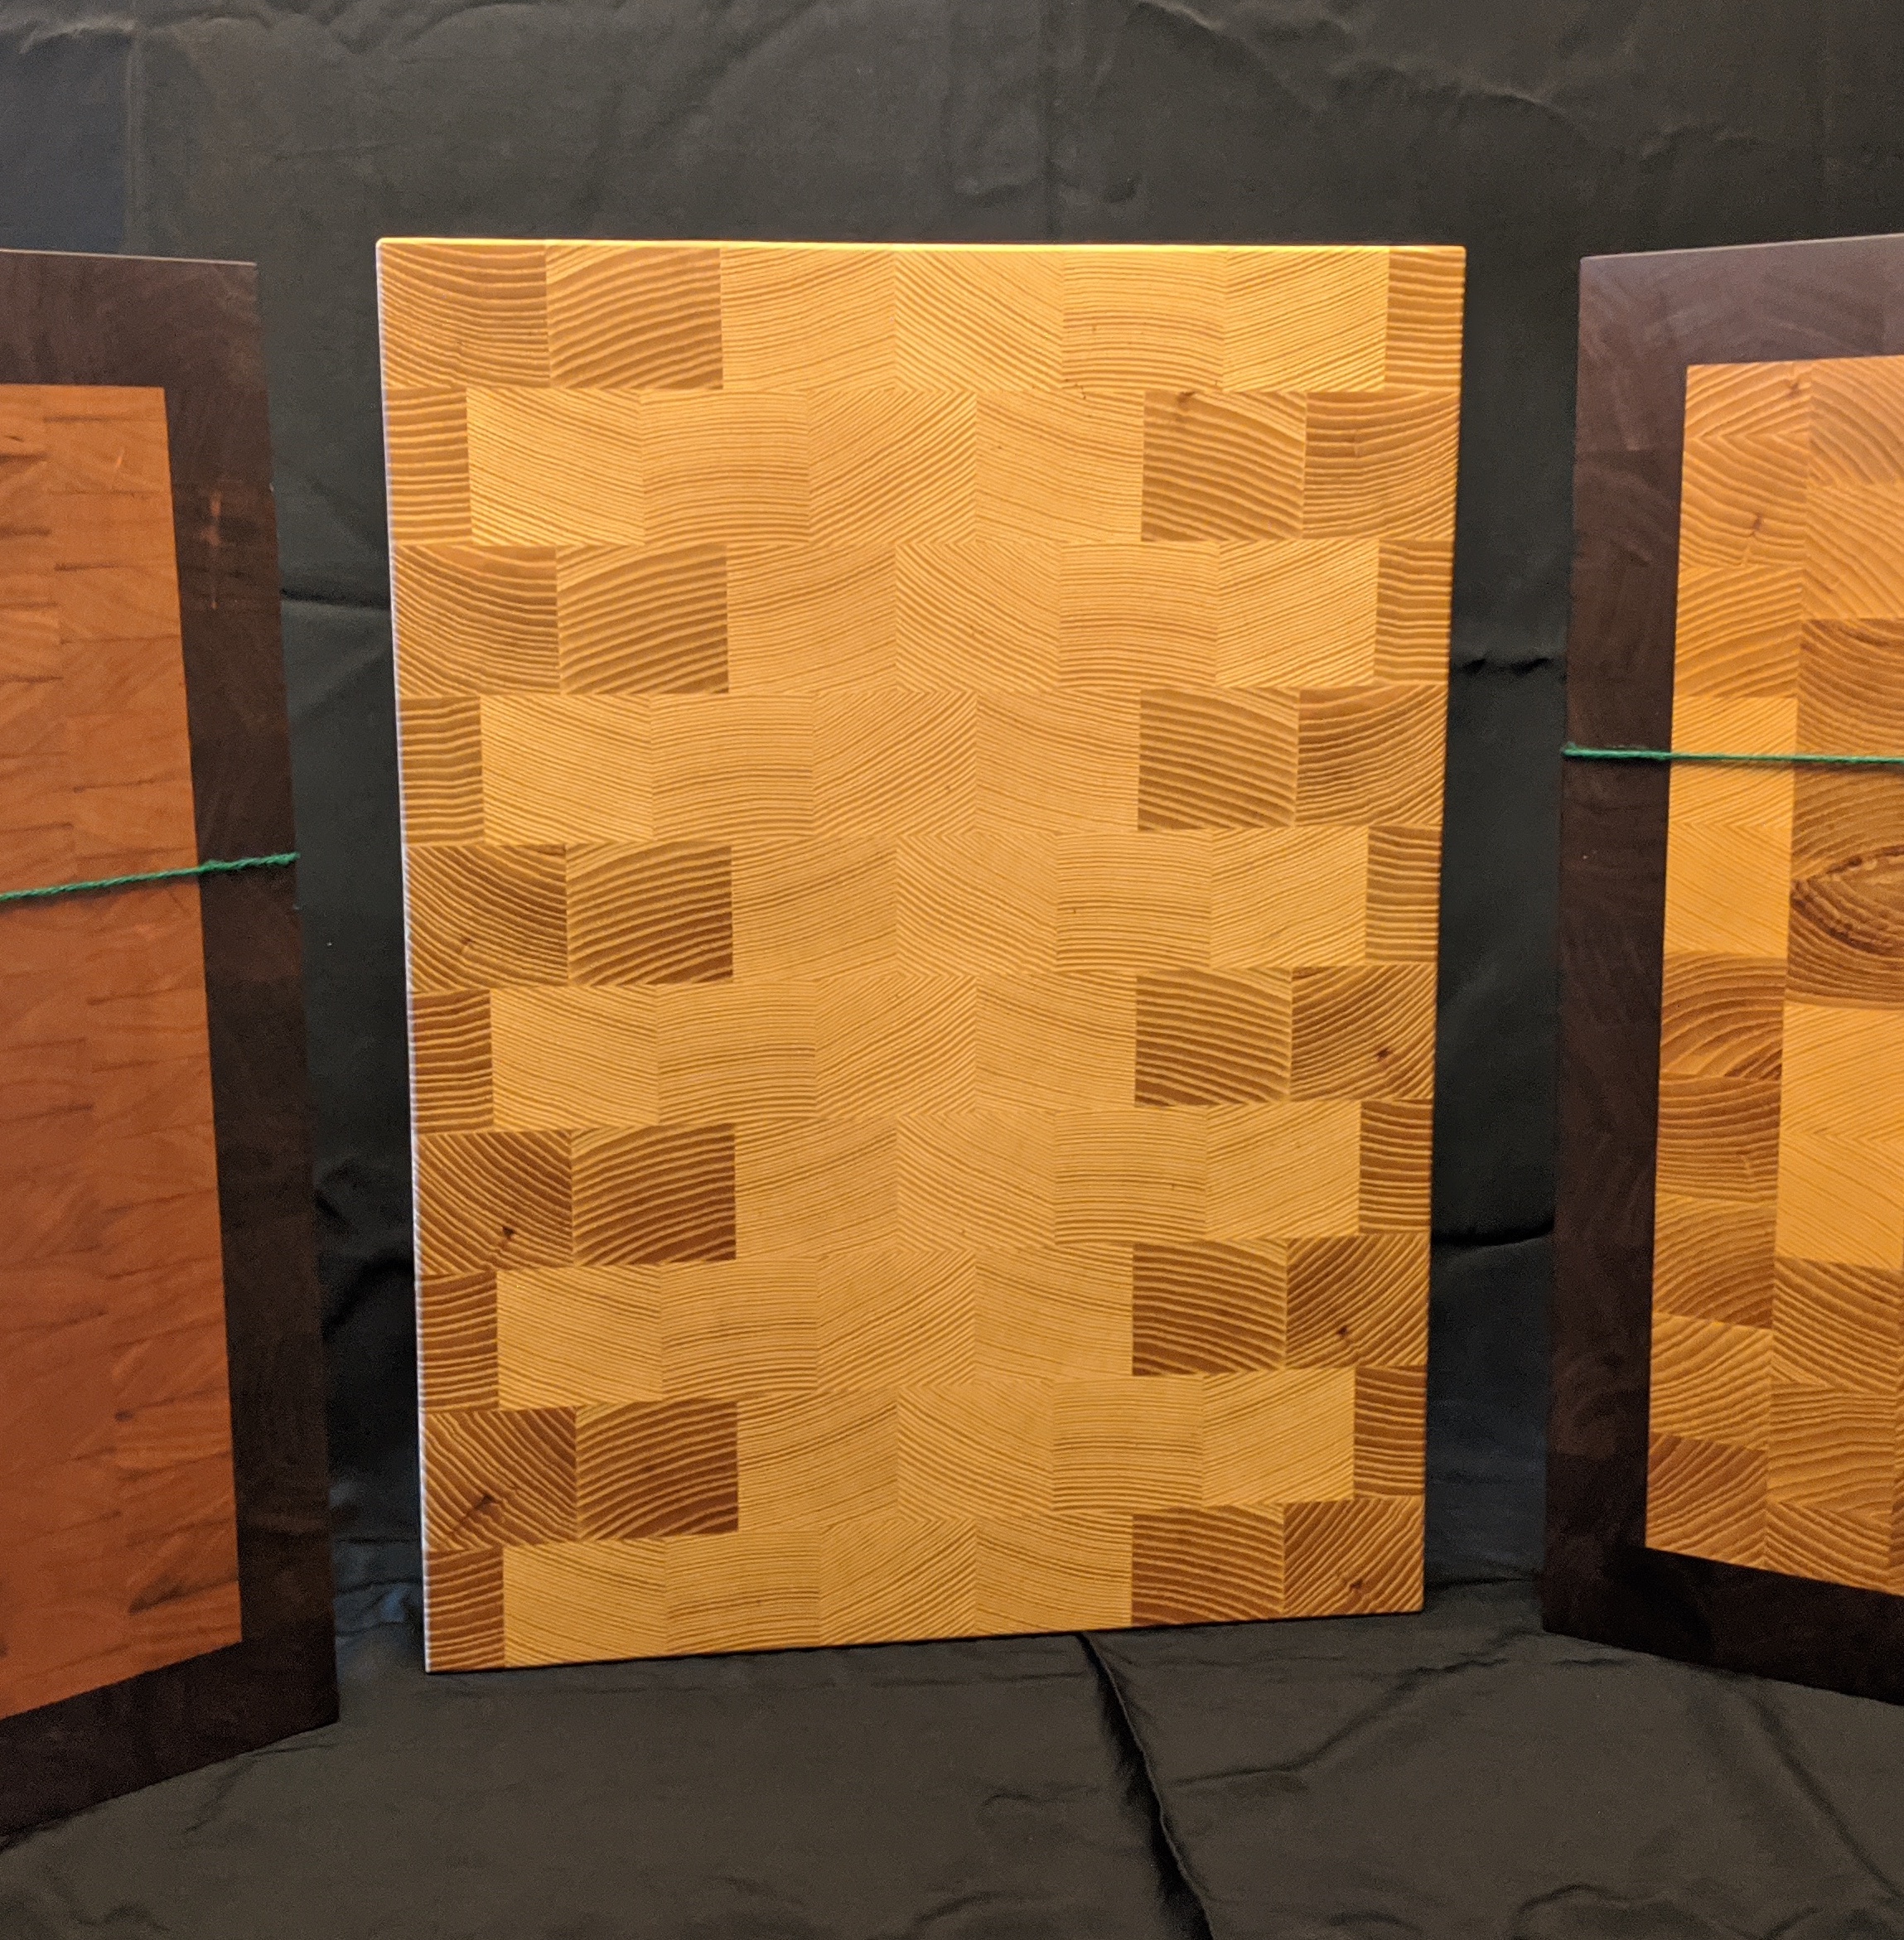 Wooden cutting boards with variegated designs using multiple kinds of wood.